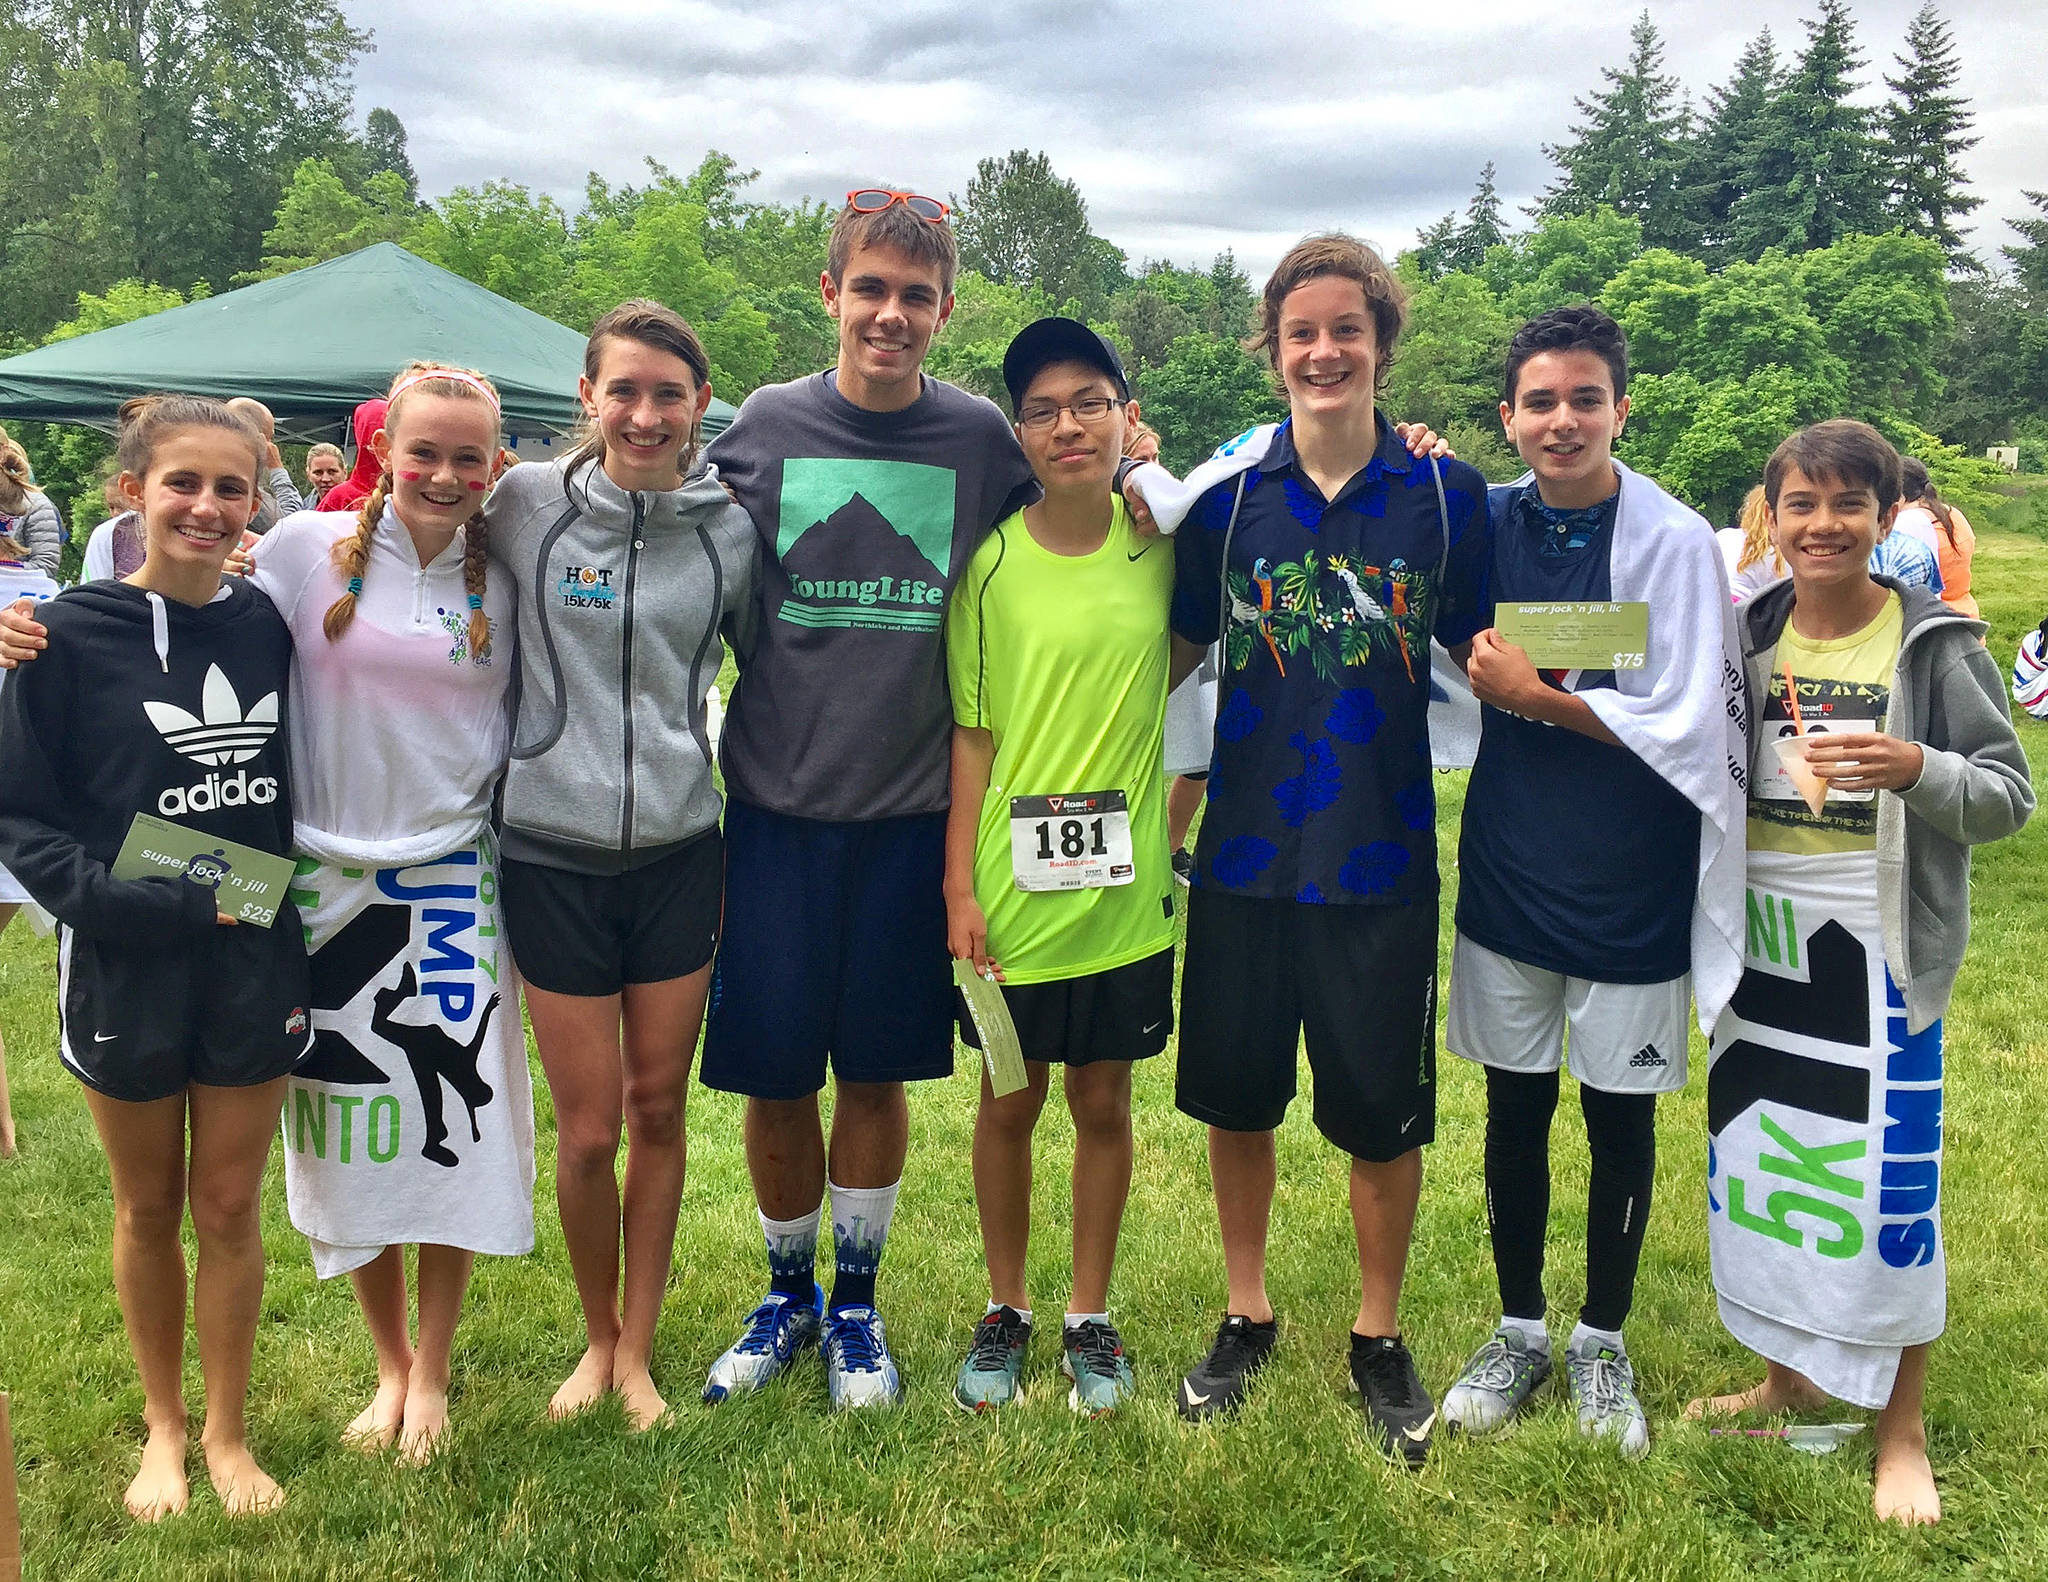 Photo courtesy of Niyati Krauser                                A plethora of Mercer Island youthful runners competed in the third annual “Mercer Island Young Life Jump into Summer” 5K run/walk on June 3 at Luther Burbank Park on Mercer Island. In the boys under 15 category, Jaden Krauser captured first place, Anthony Brondello nabbed second place and Oscar Pont tallied a third place finish. In the girls under 15 division, Christina Crow finished in first place and Sophia Morelli cruised to a second place showing. In the boys over 16 category, Eric Moreno registered a first place finish and Ben Biggers captured second place. In the girls over 16 division, Maggie Baker earned first place and Leslie Urie finished in second place.